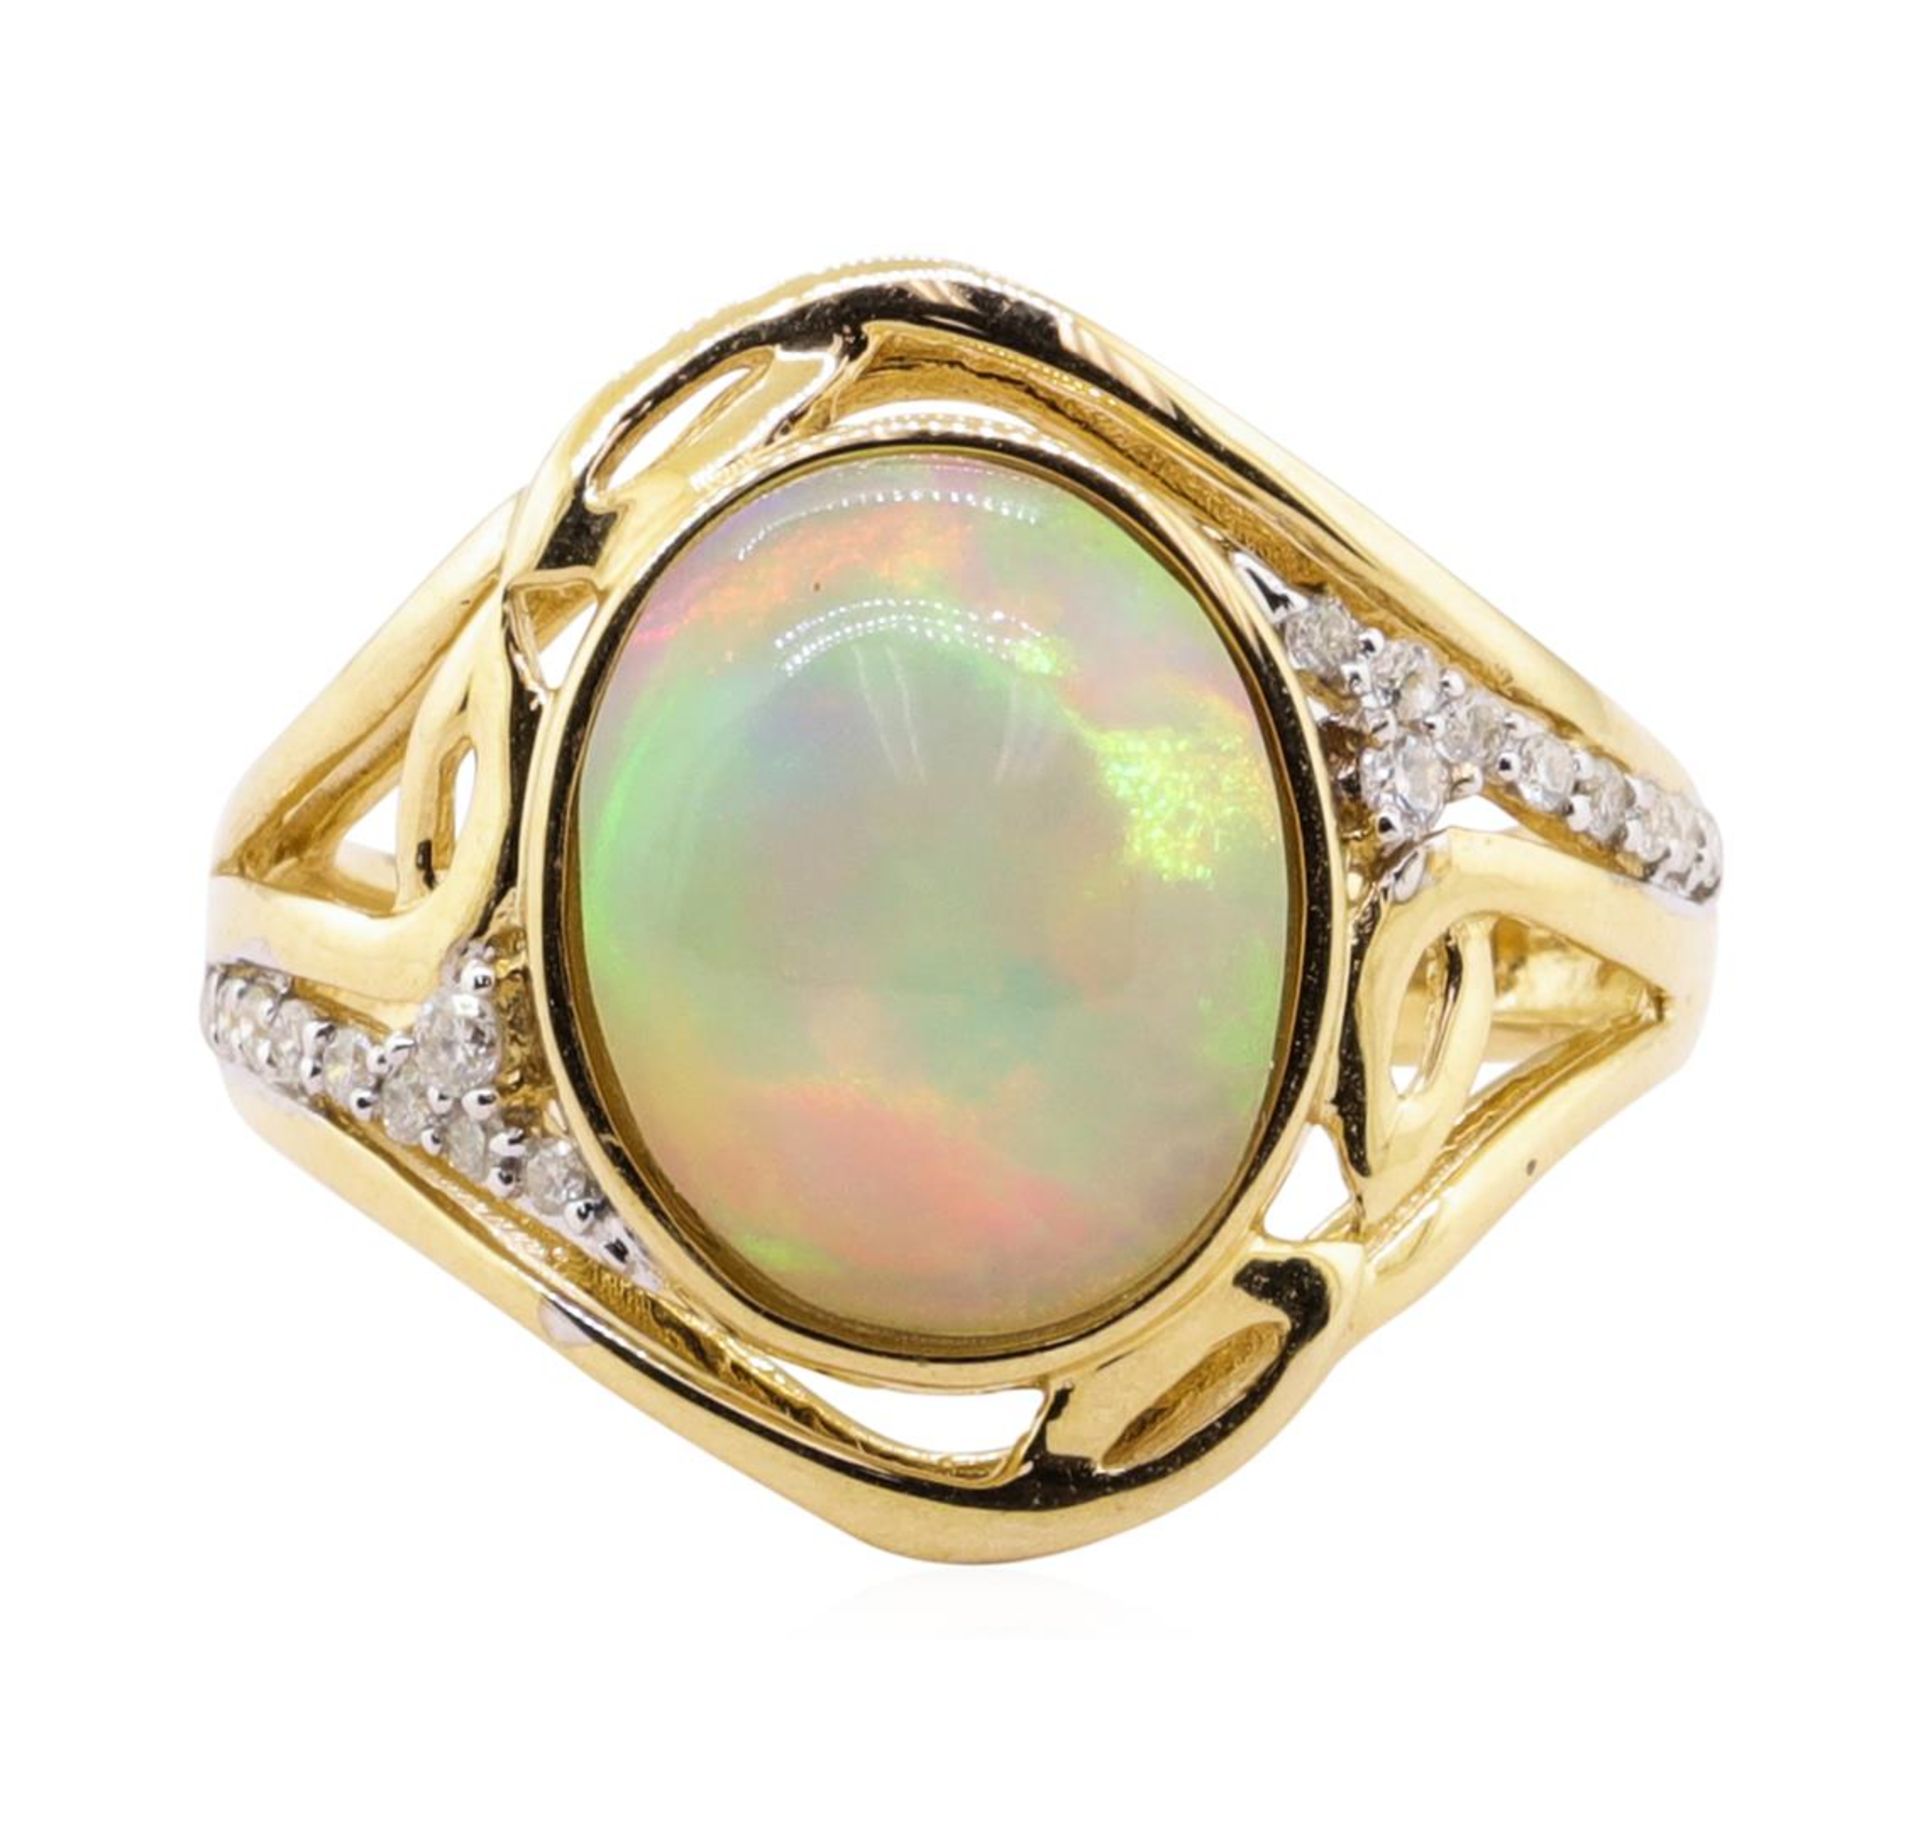 3.12ct Opal and Diamond Ring - 14KT Yellow Gold